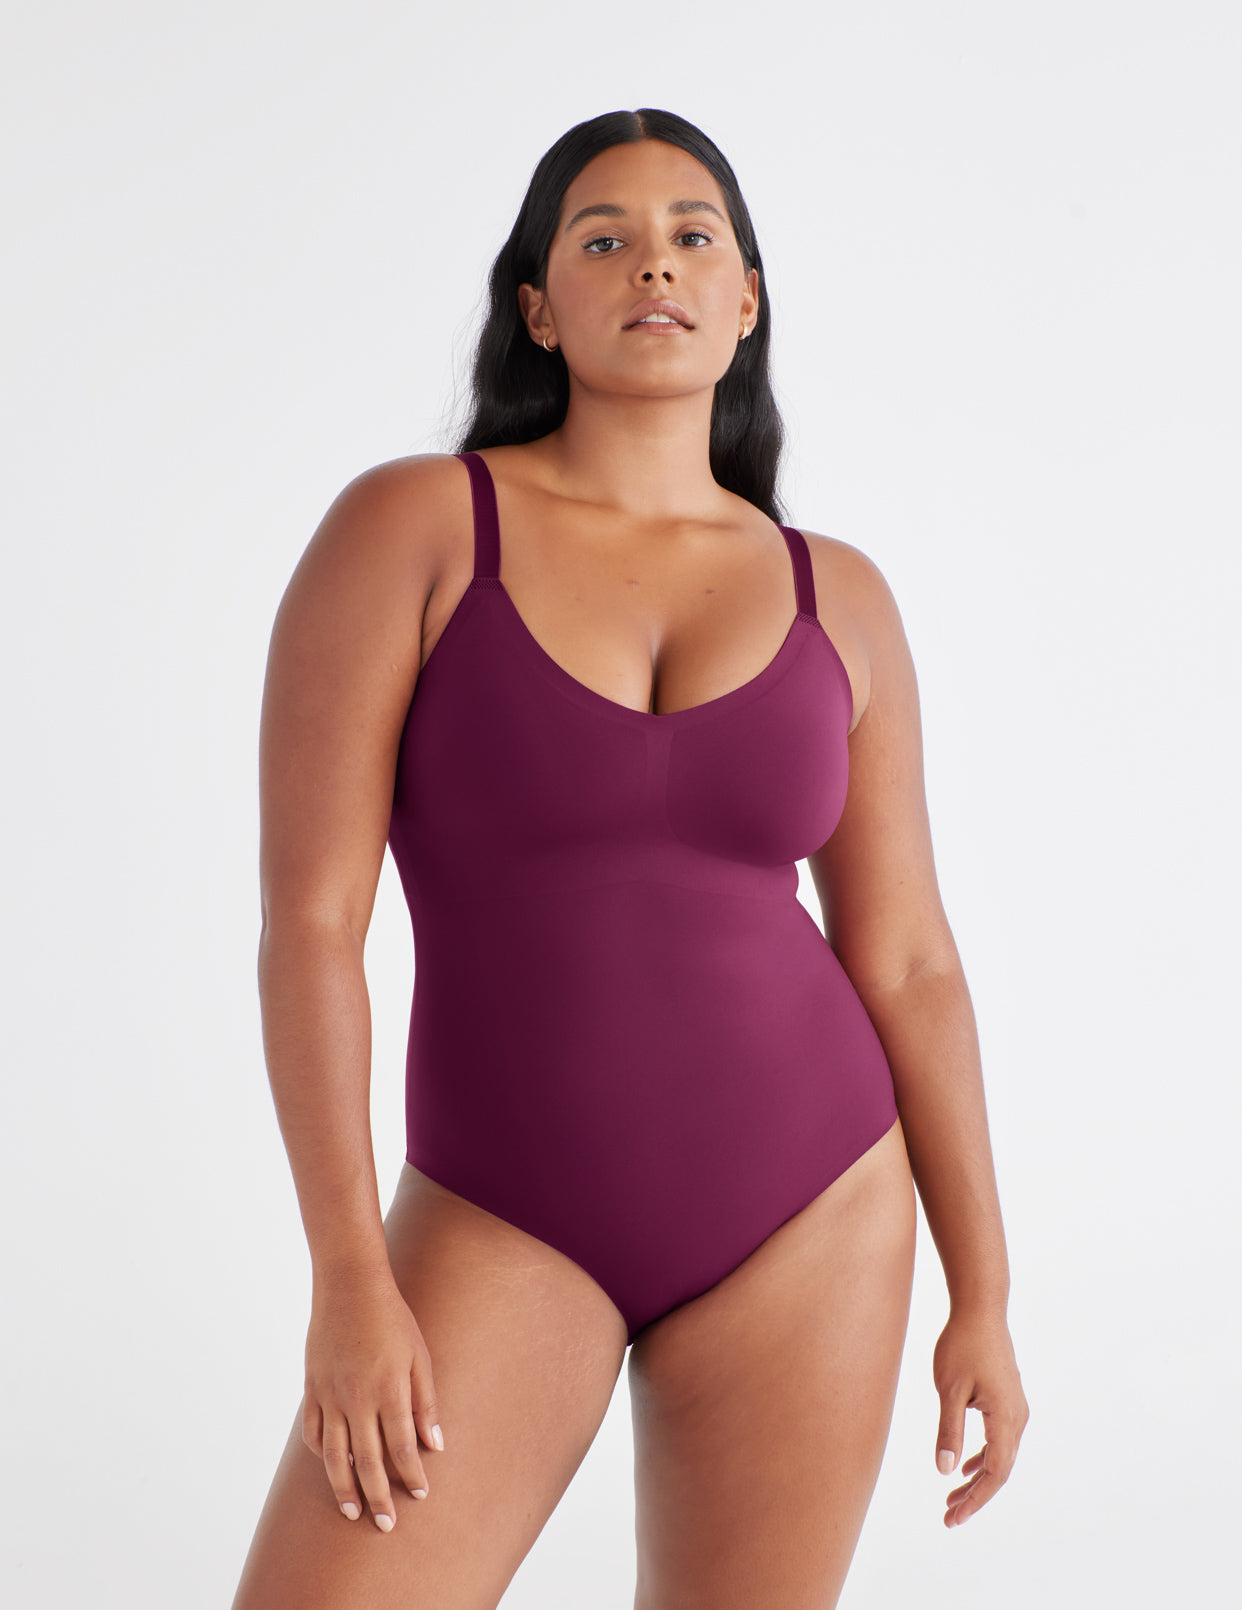 Adiya is a 36D and has 42" hips and wears a Knix size L 